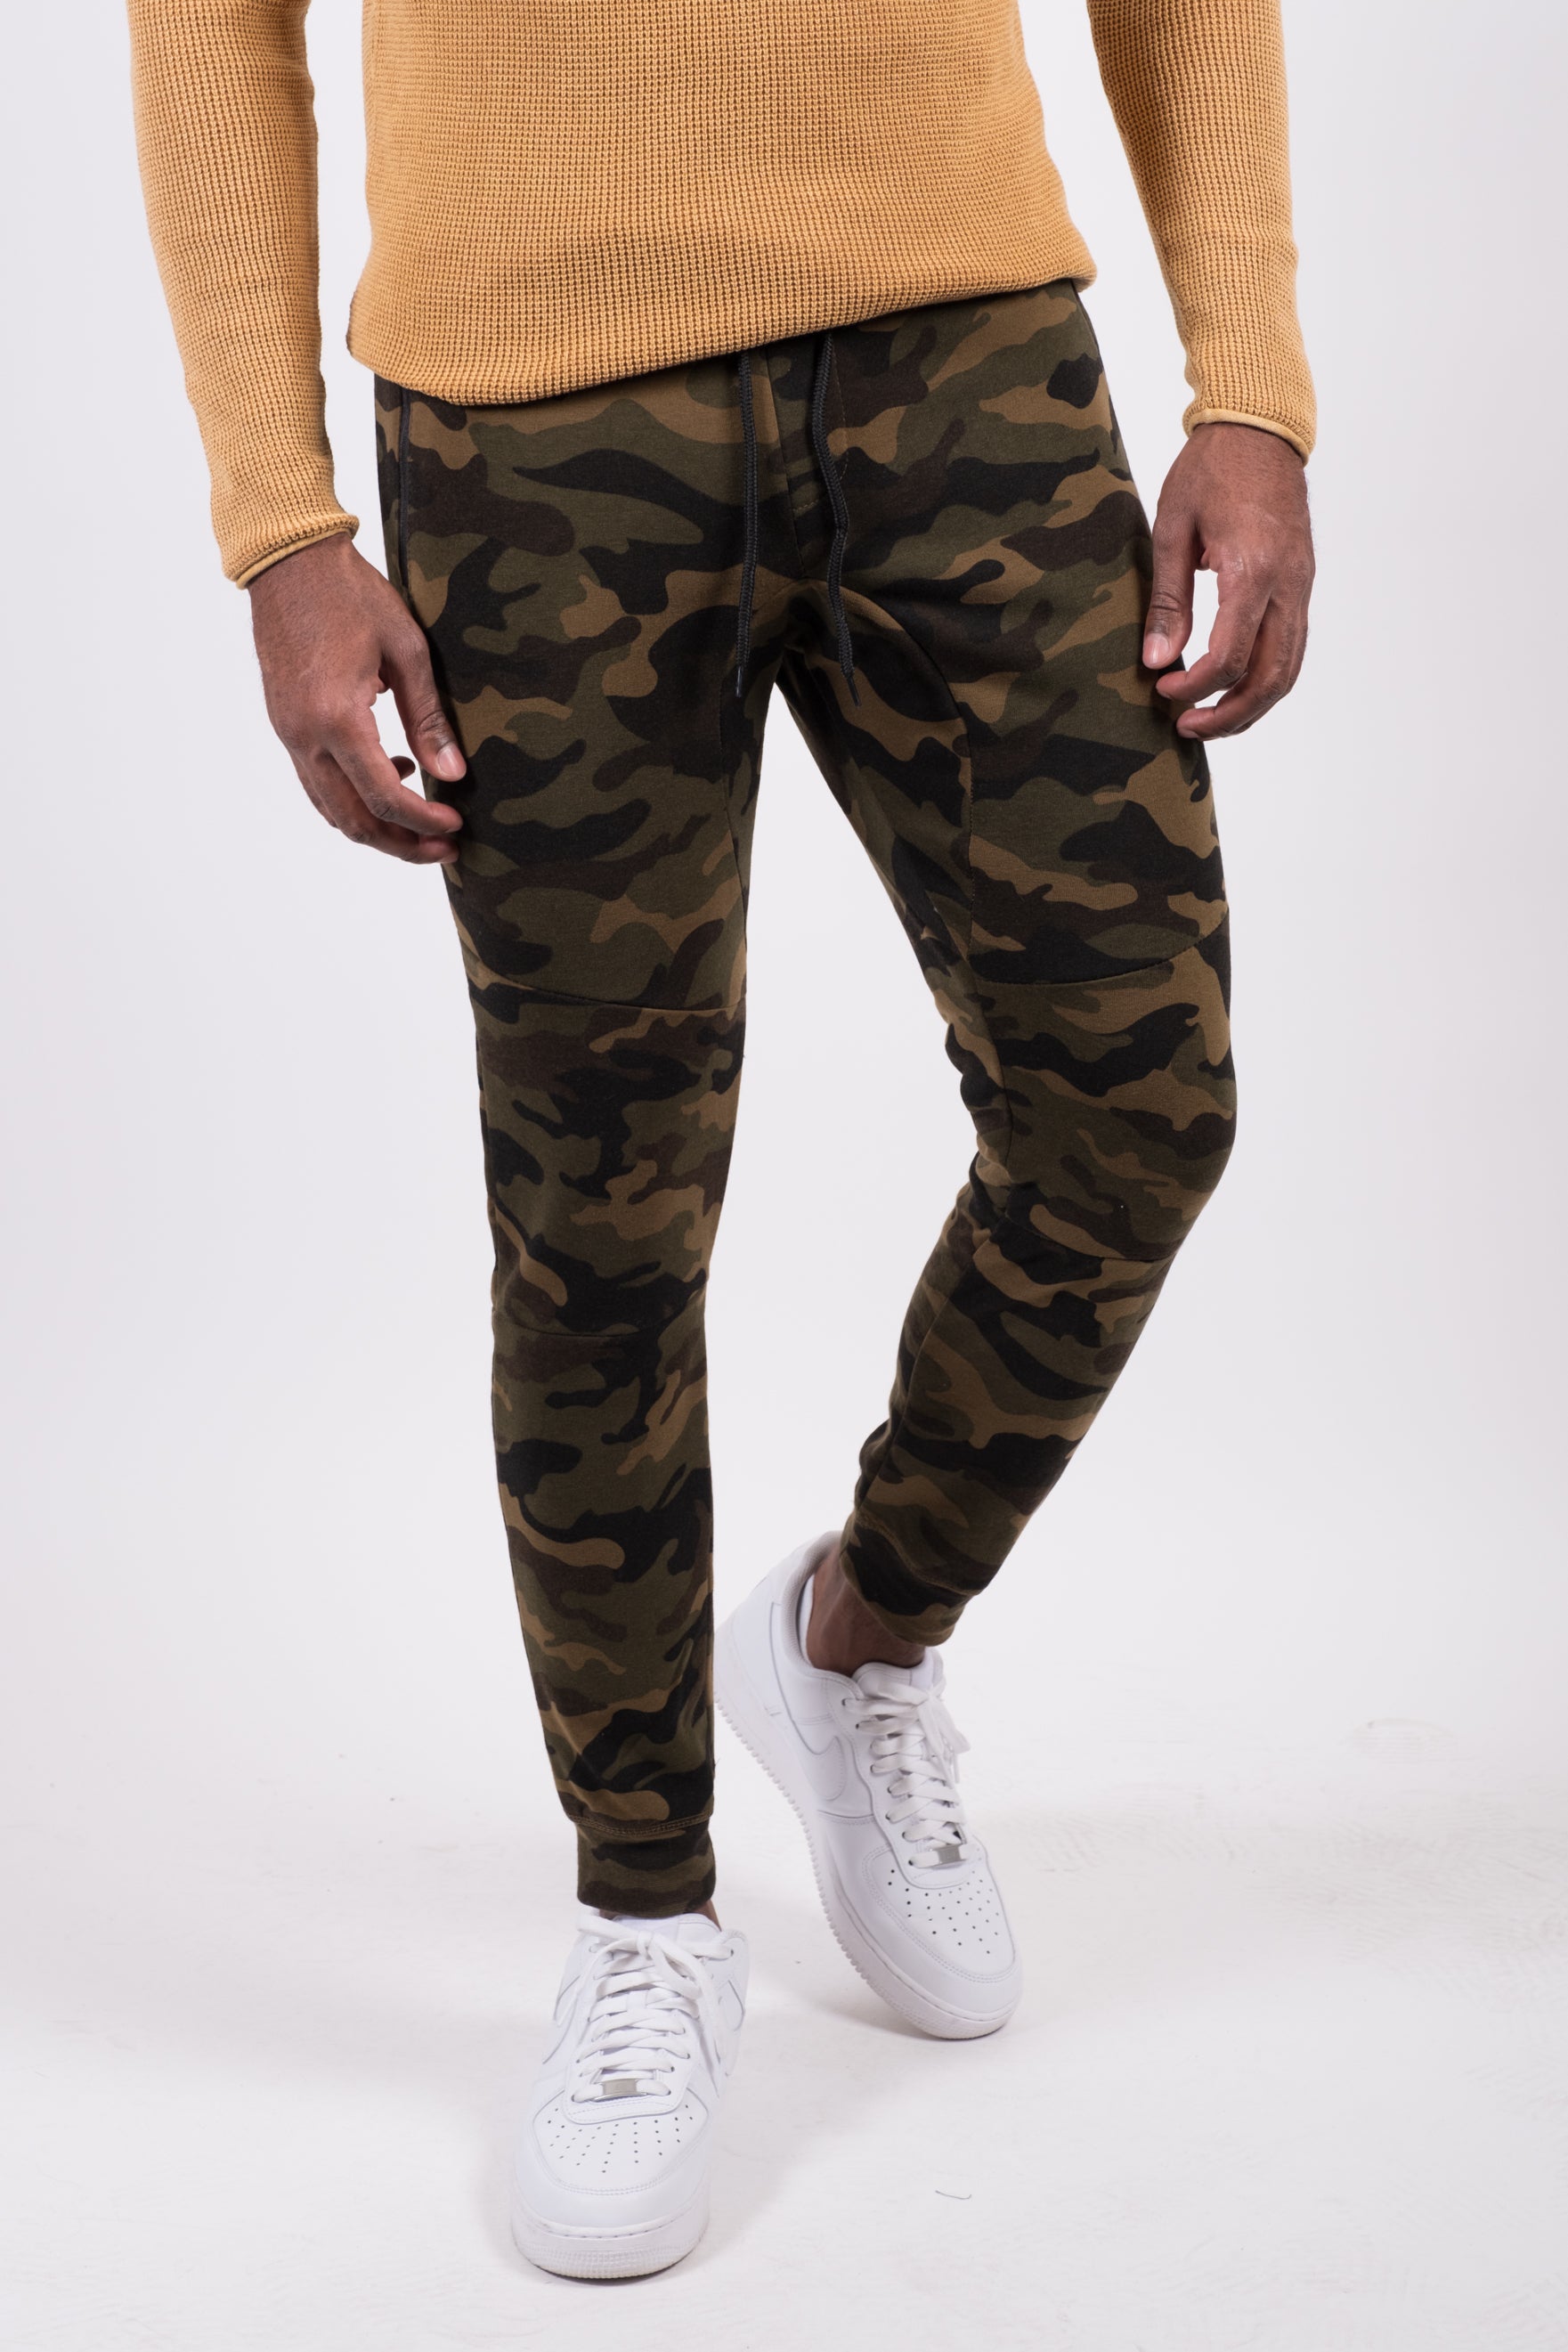 Stay Stylish and Comfortable with Our Jogger Pants